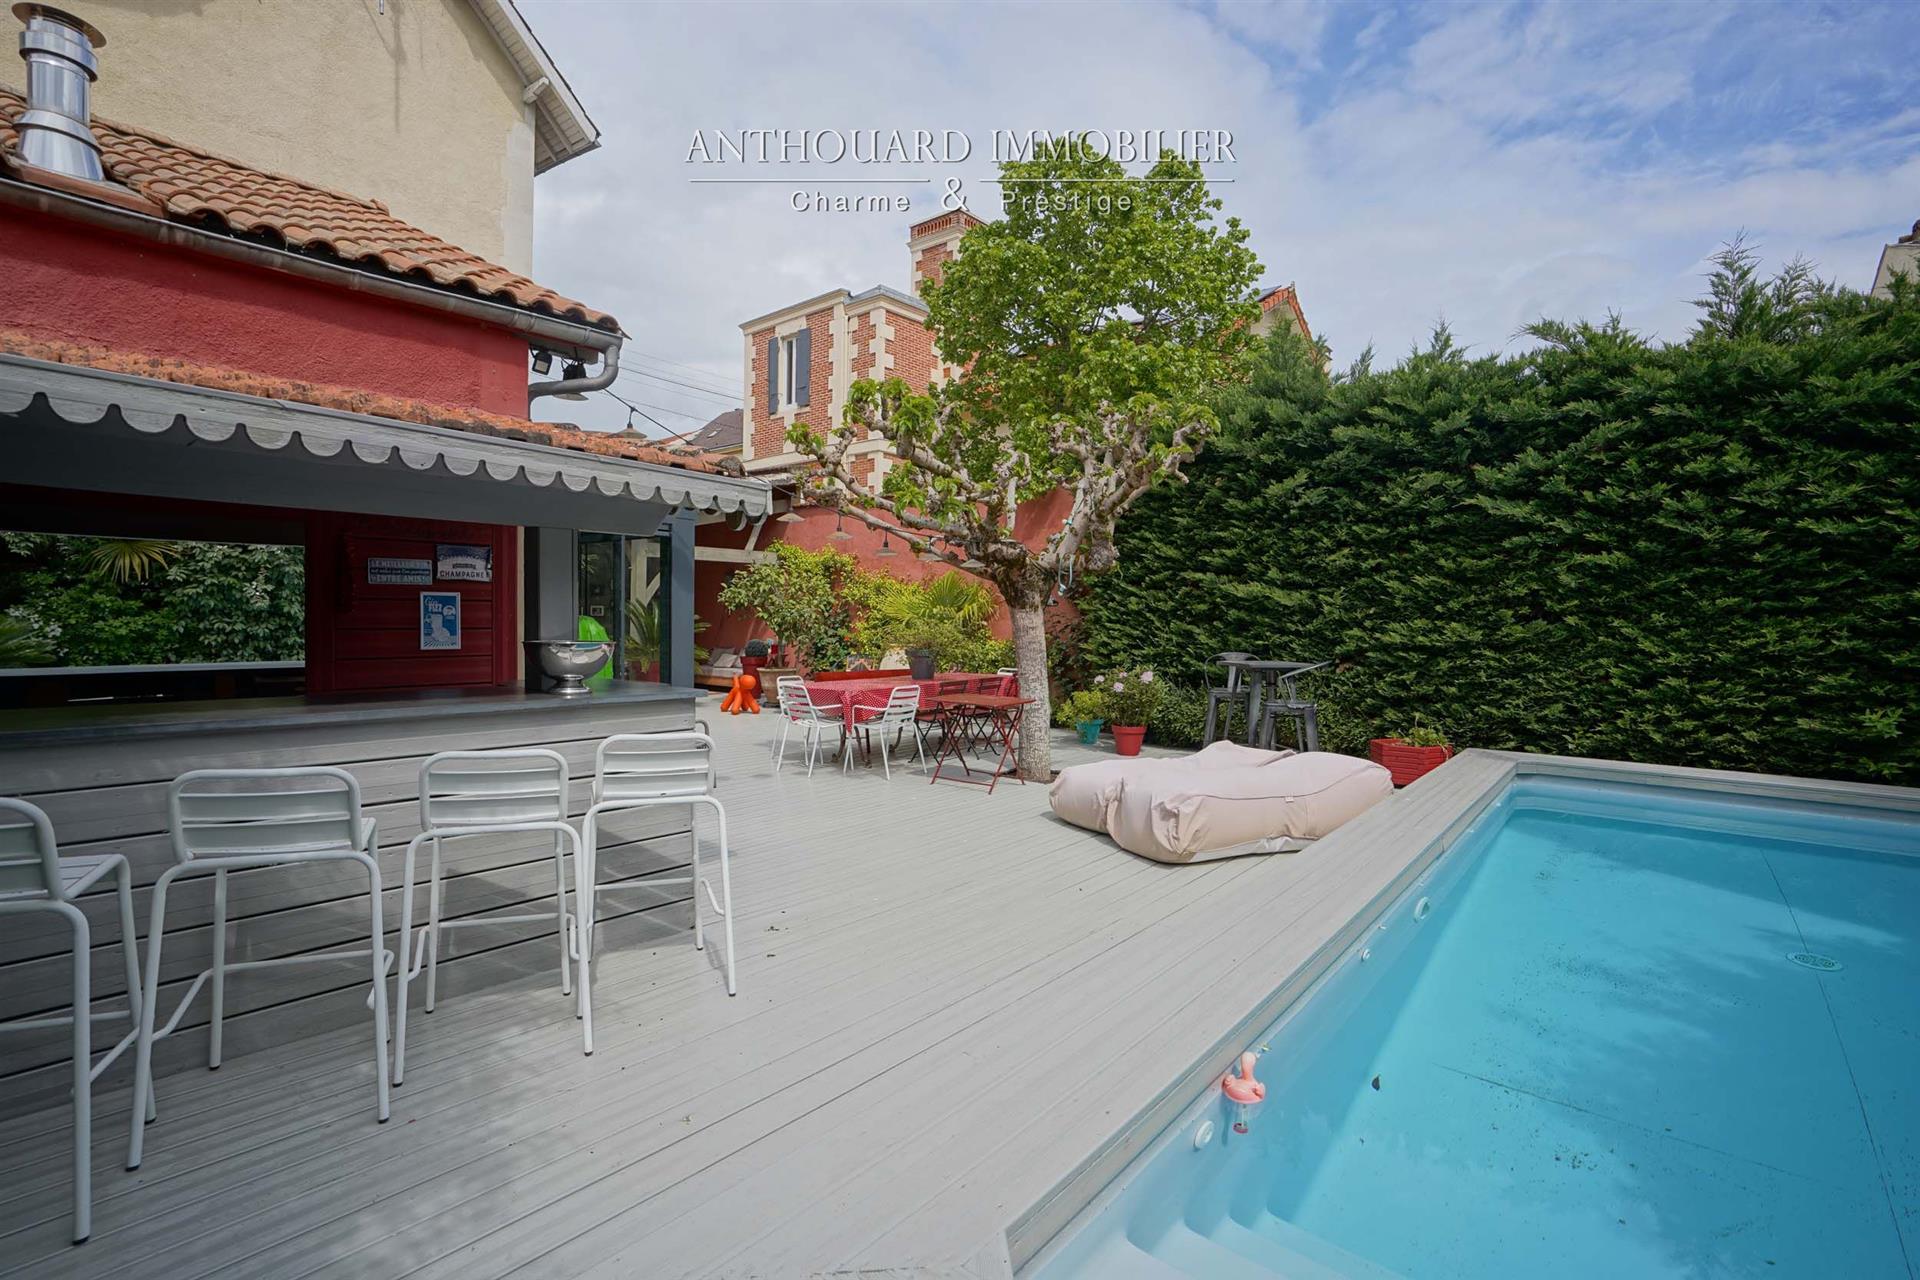 Very charming bourgeois house, swimming pool